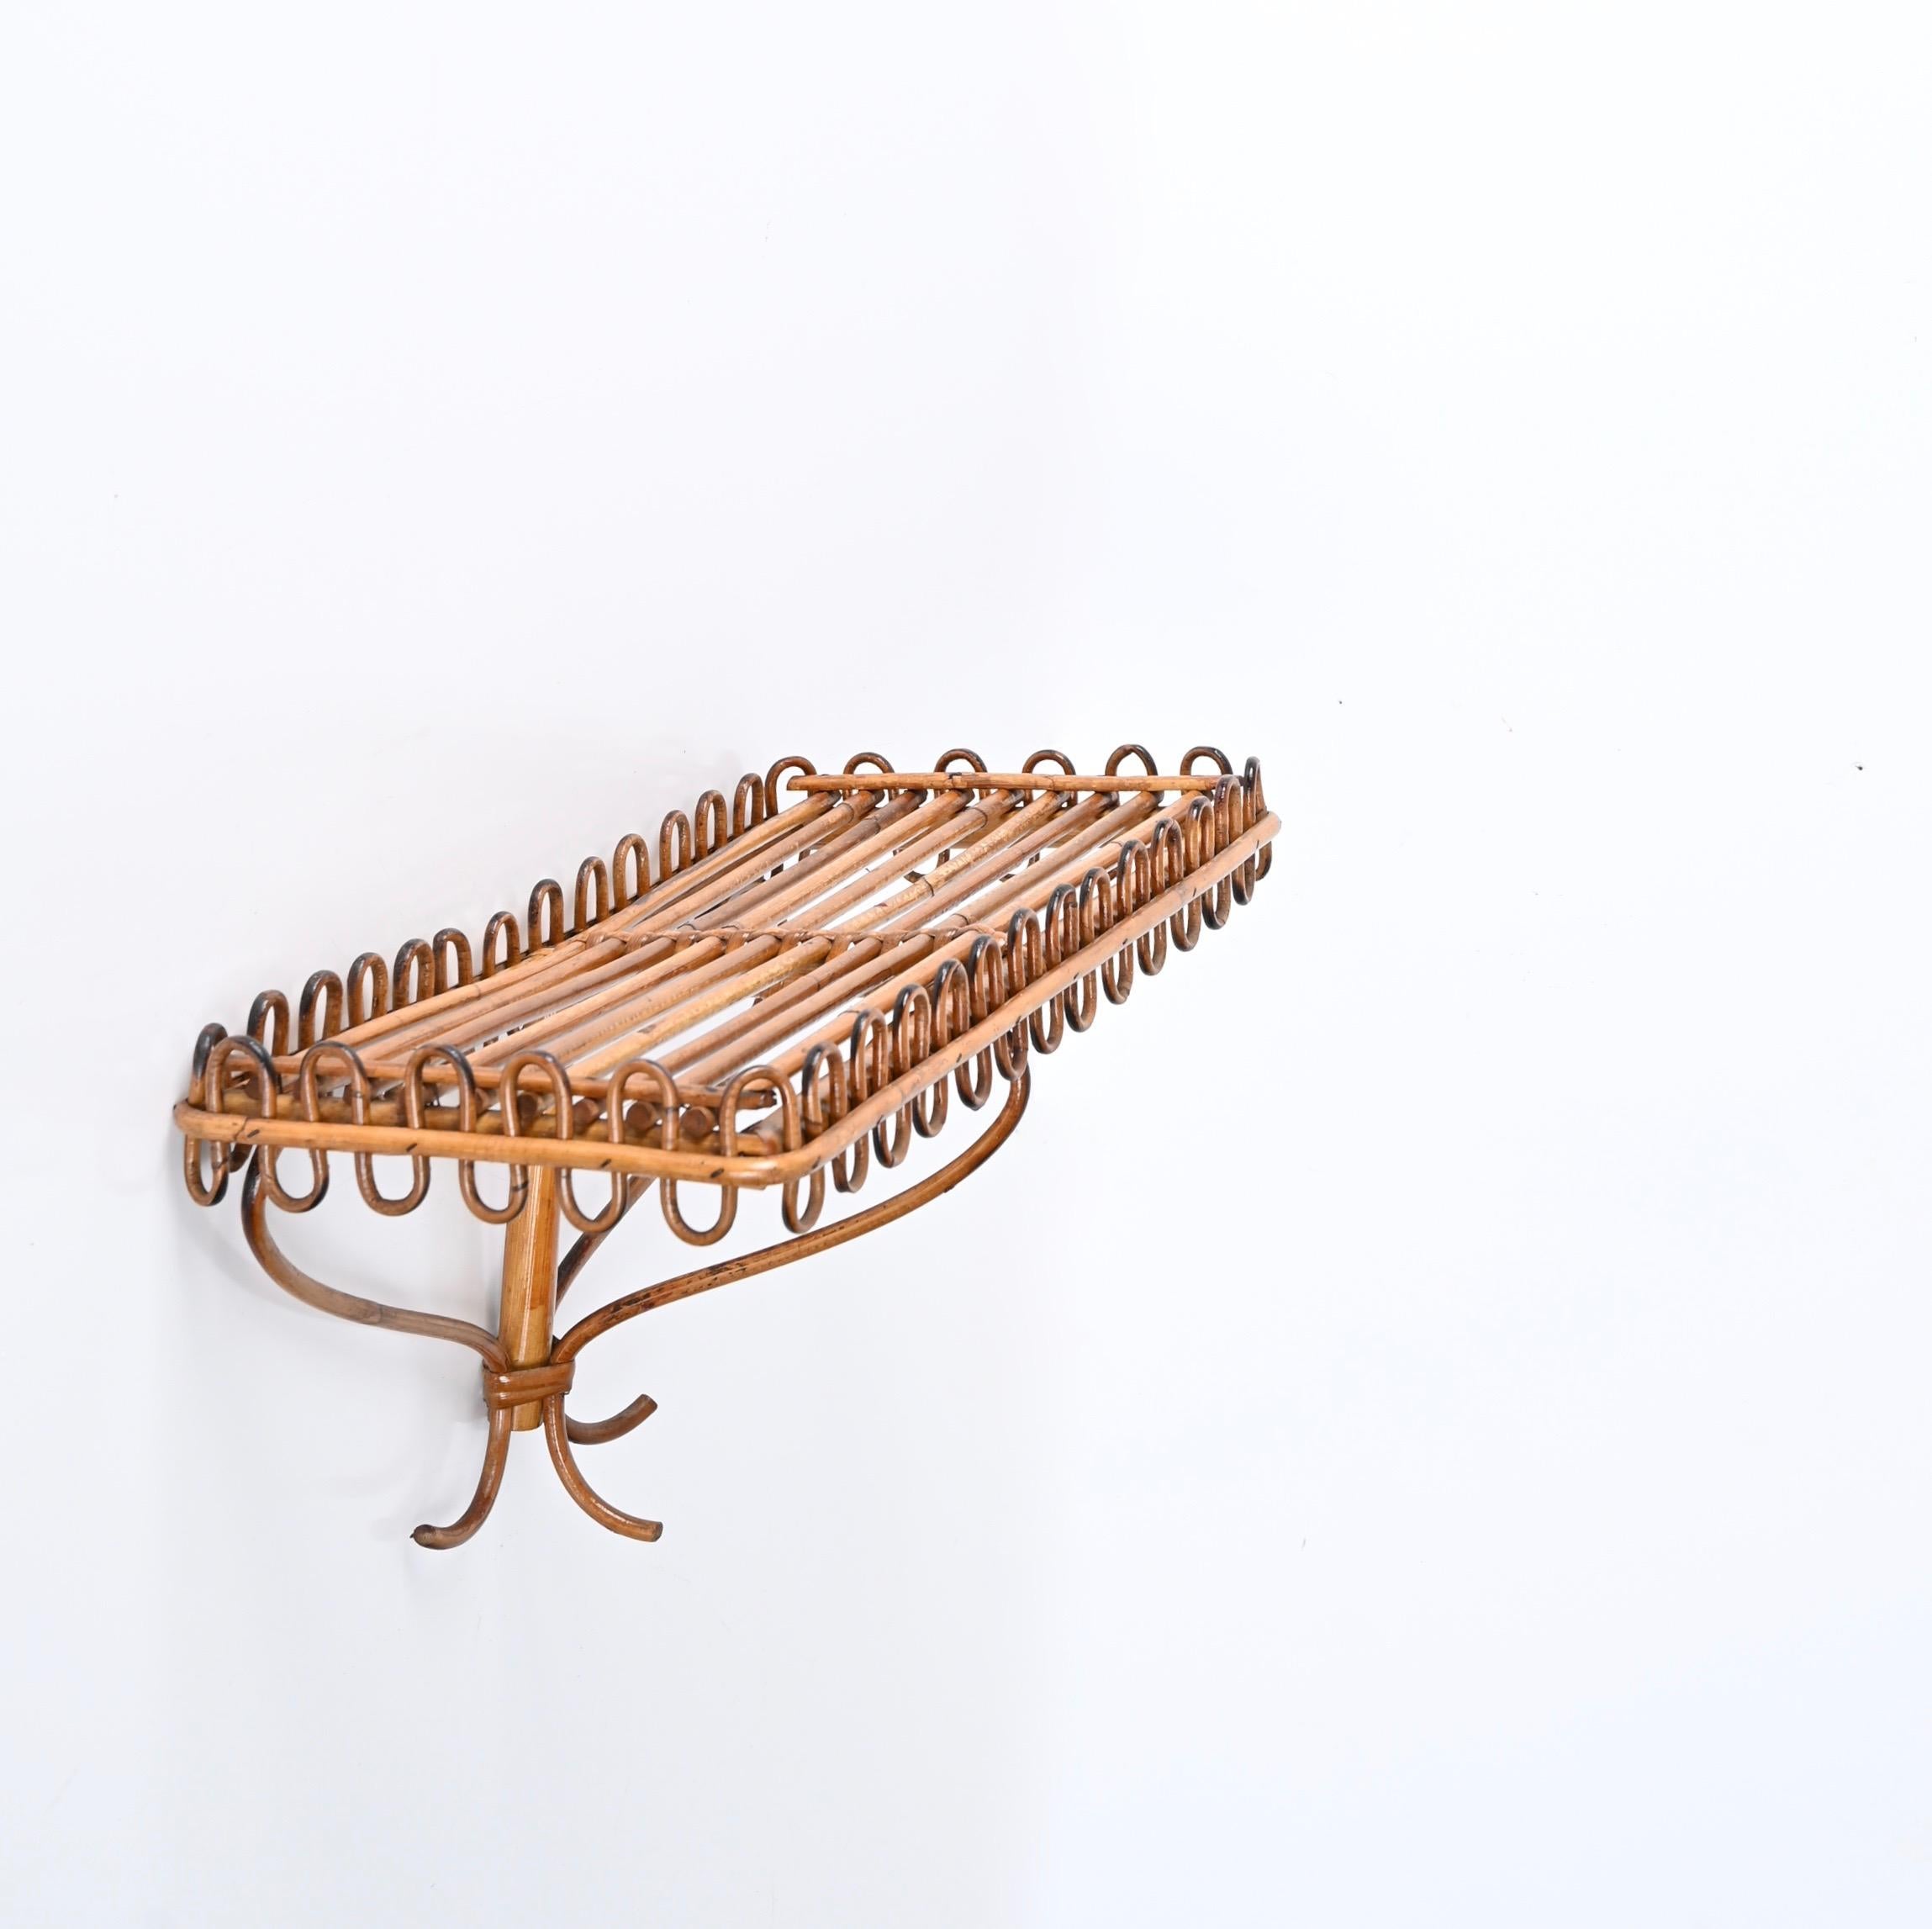 Midcentury Rattan and Bamboo Wall Shelf or Console, Franco Albini, Italy, 1960s For Sale 4